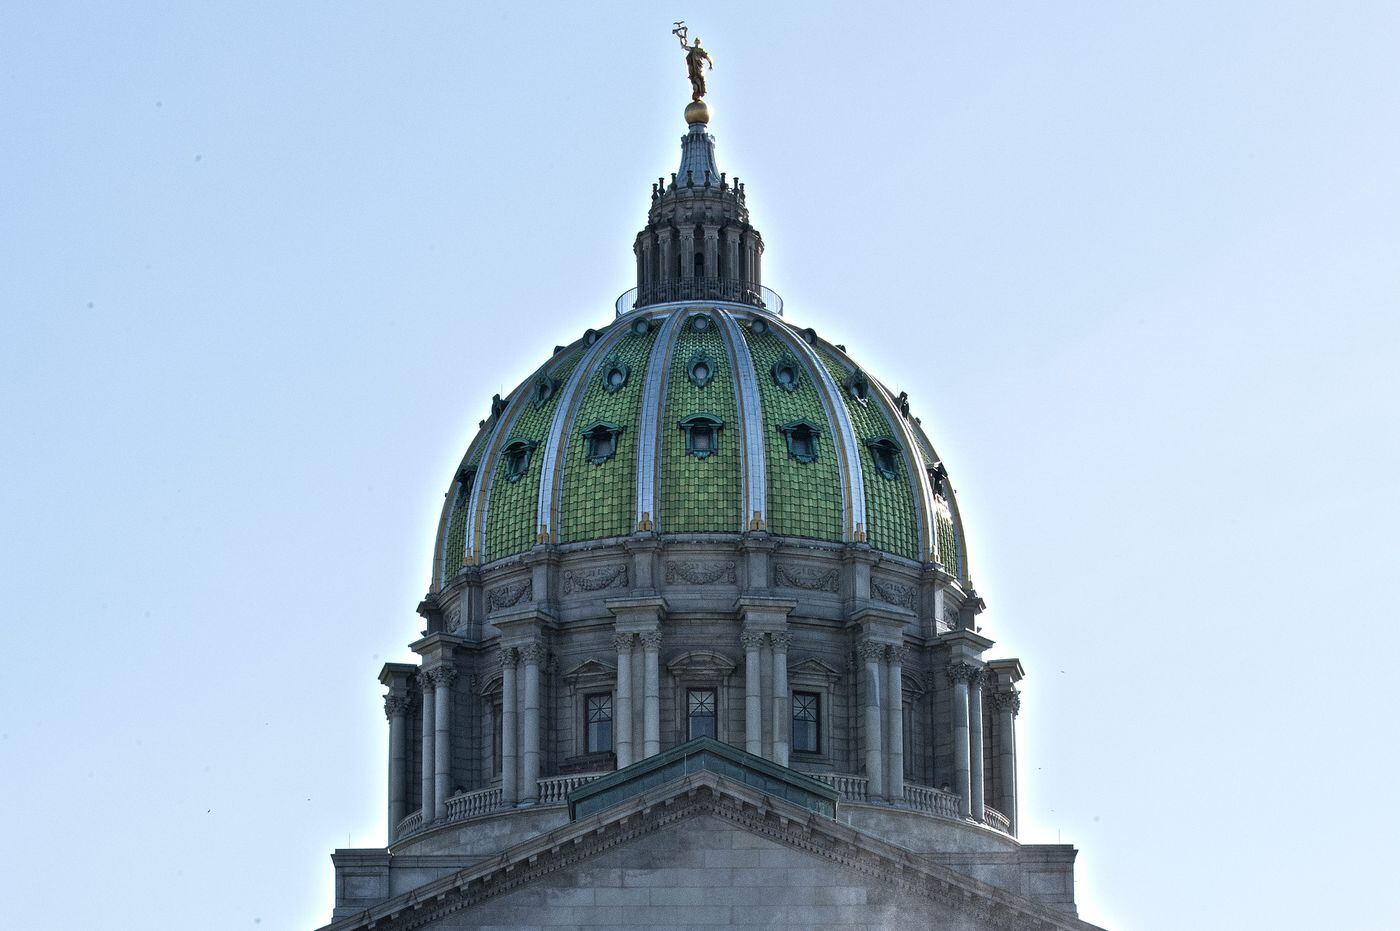 Pa. Senate security force convulsed by harassment complaints, lawsuits